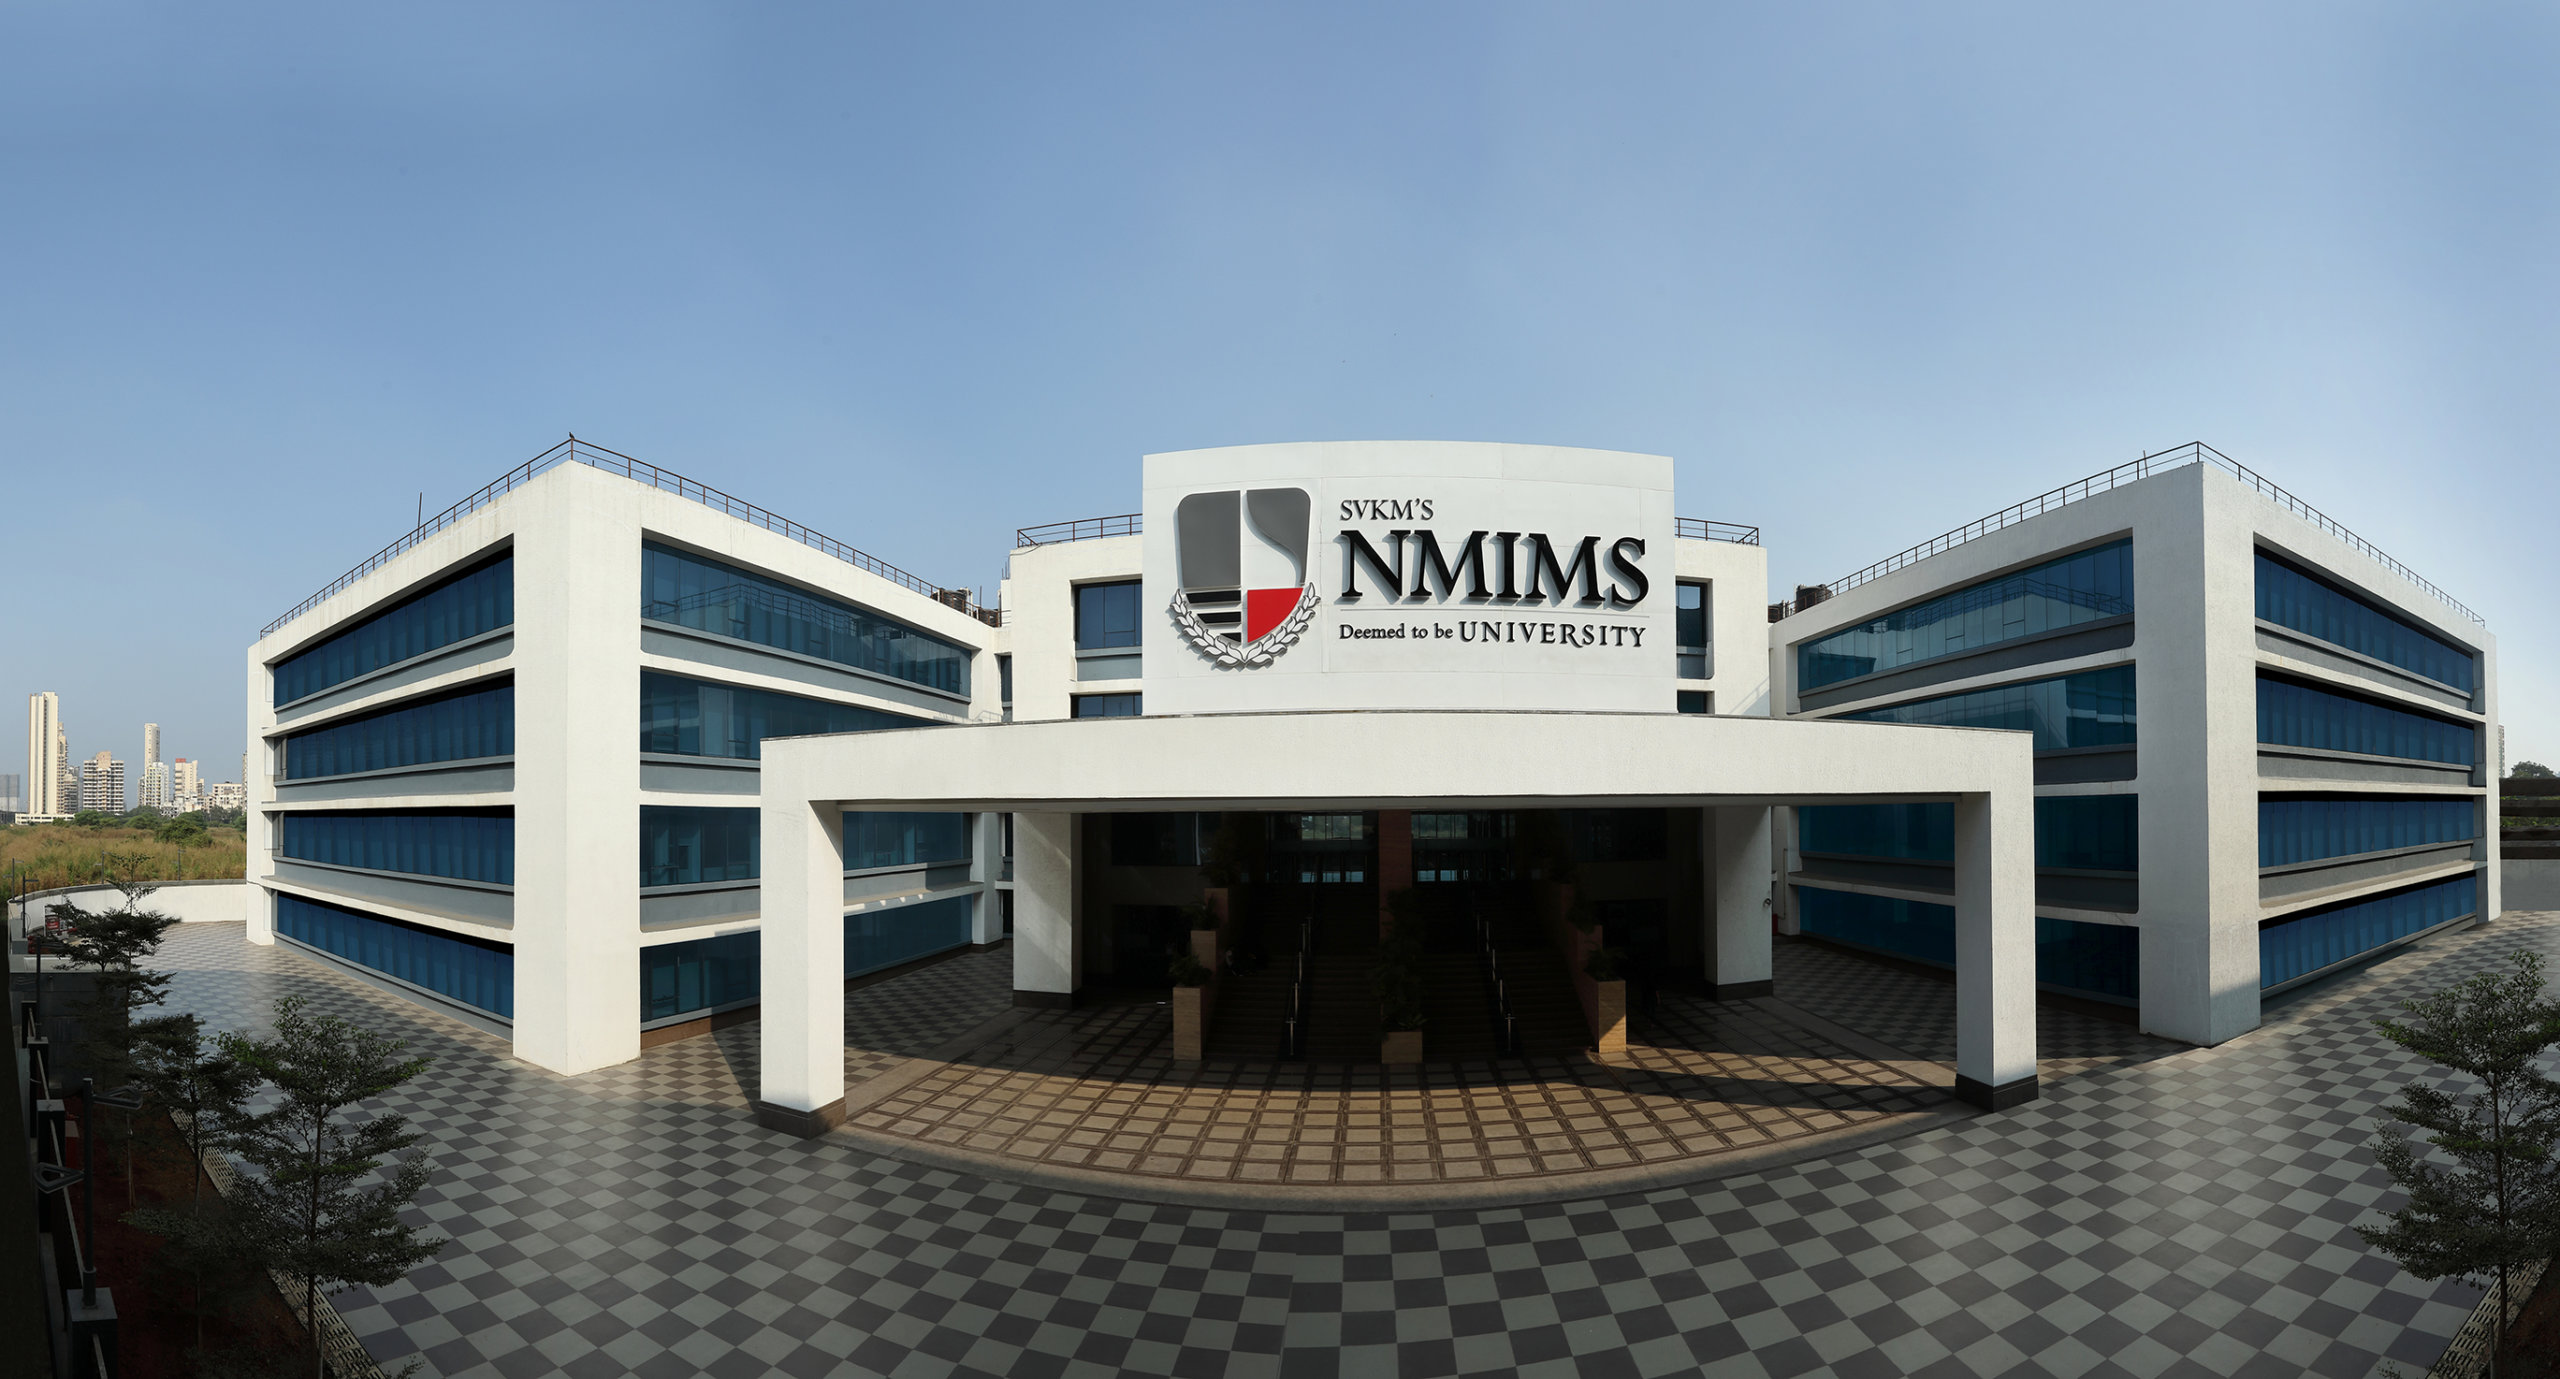 NMIMS Commences Registrations for its Flagship MBA Law Program